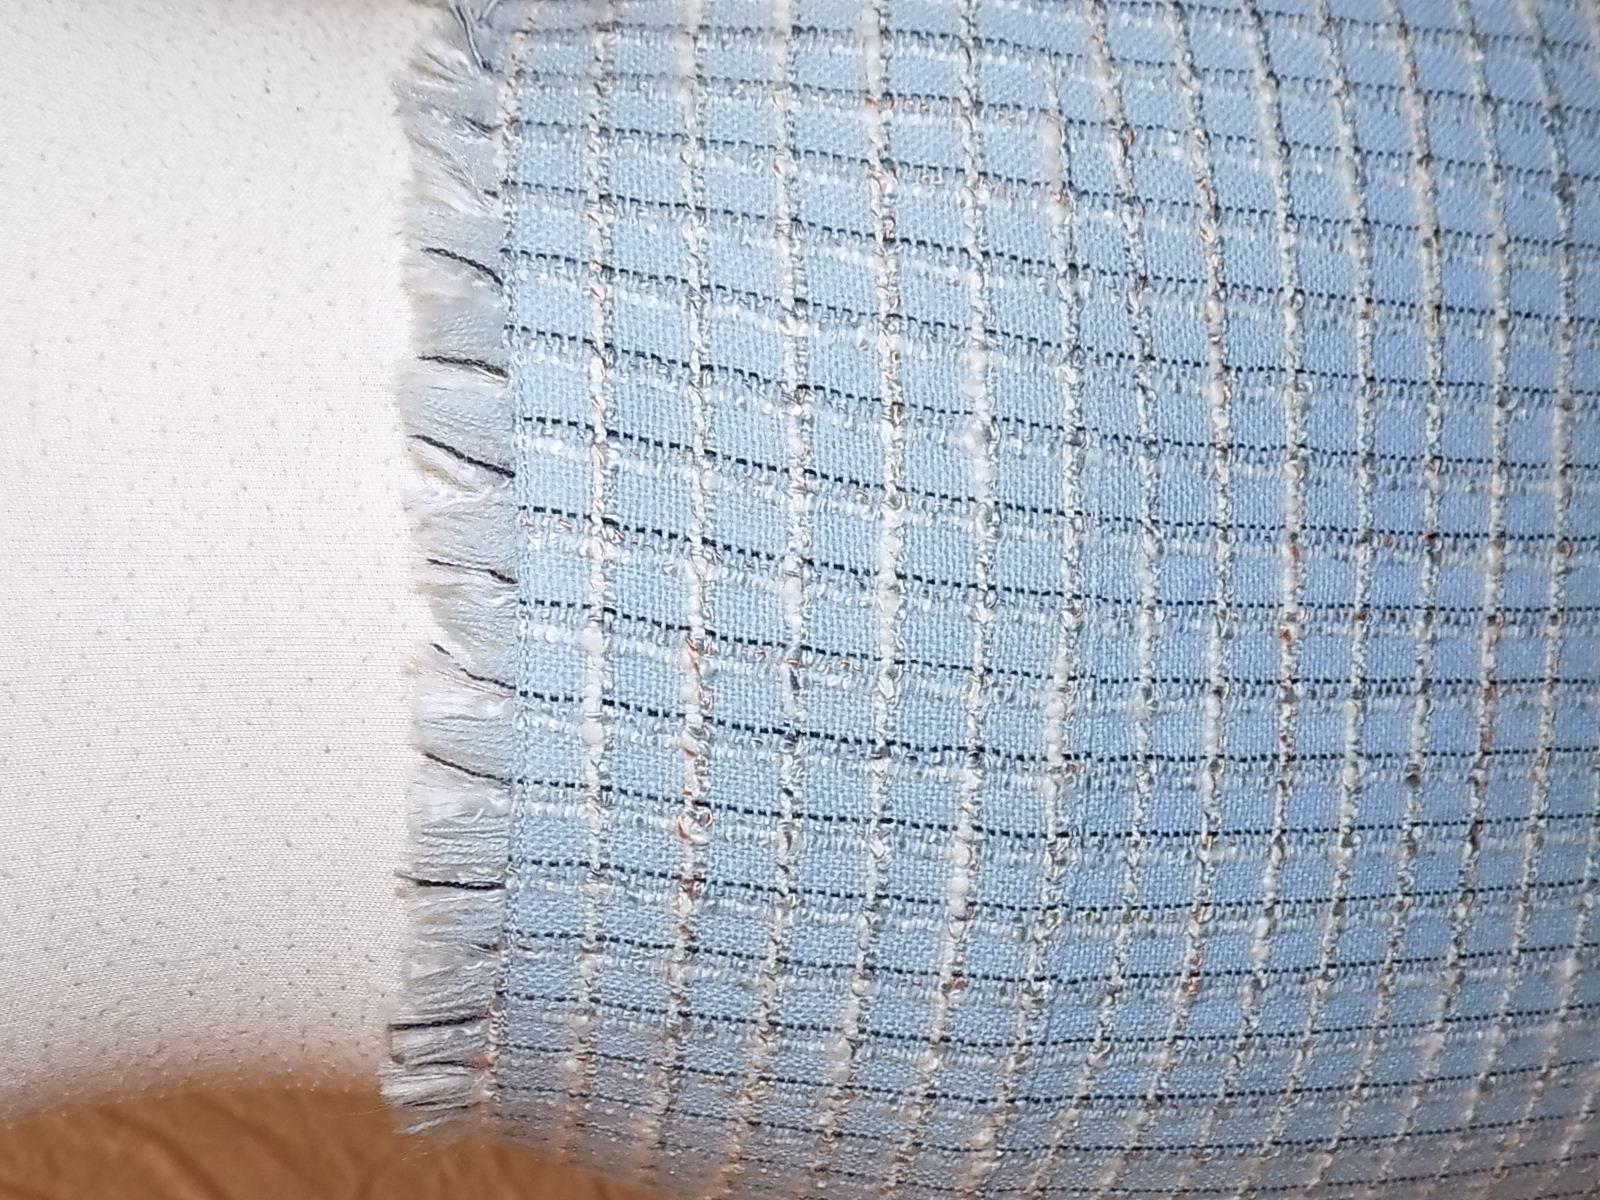 Vintage Chanel light blue skirt. Woven fabric . Cotton, wool and acrylic blend. Silk lined . Collection 98 Spring. Fringe finish. Size 40
Pristine condition like new.
Waist 30